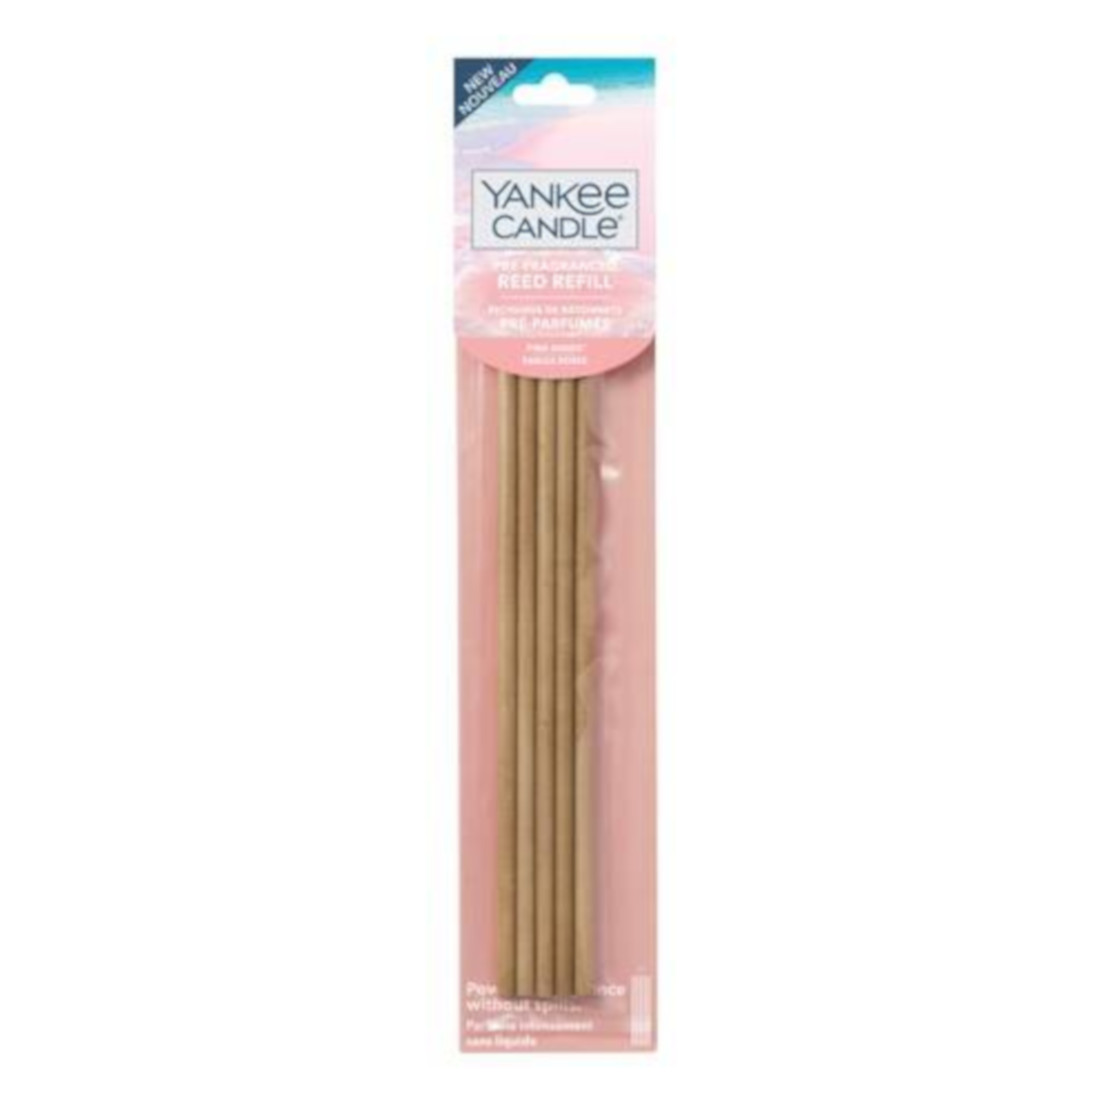 Yankee Candle Pink Sands Pre-Fragranced Reed Diffuser Refills